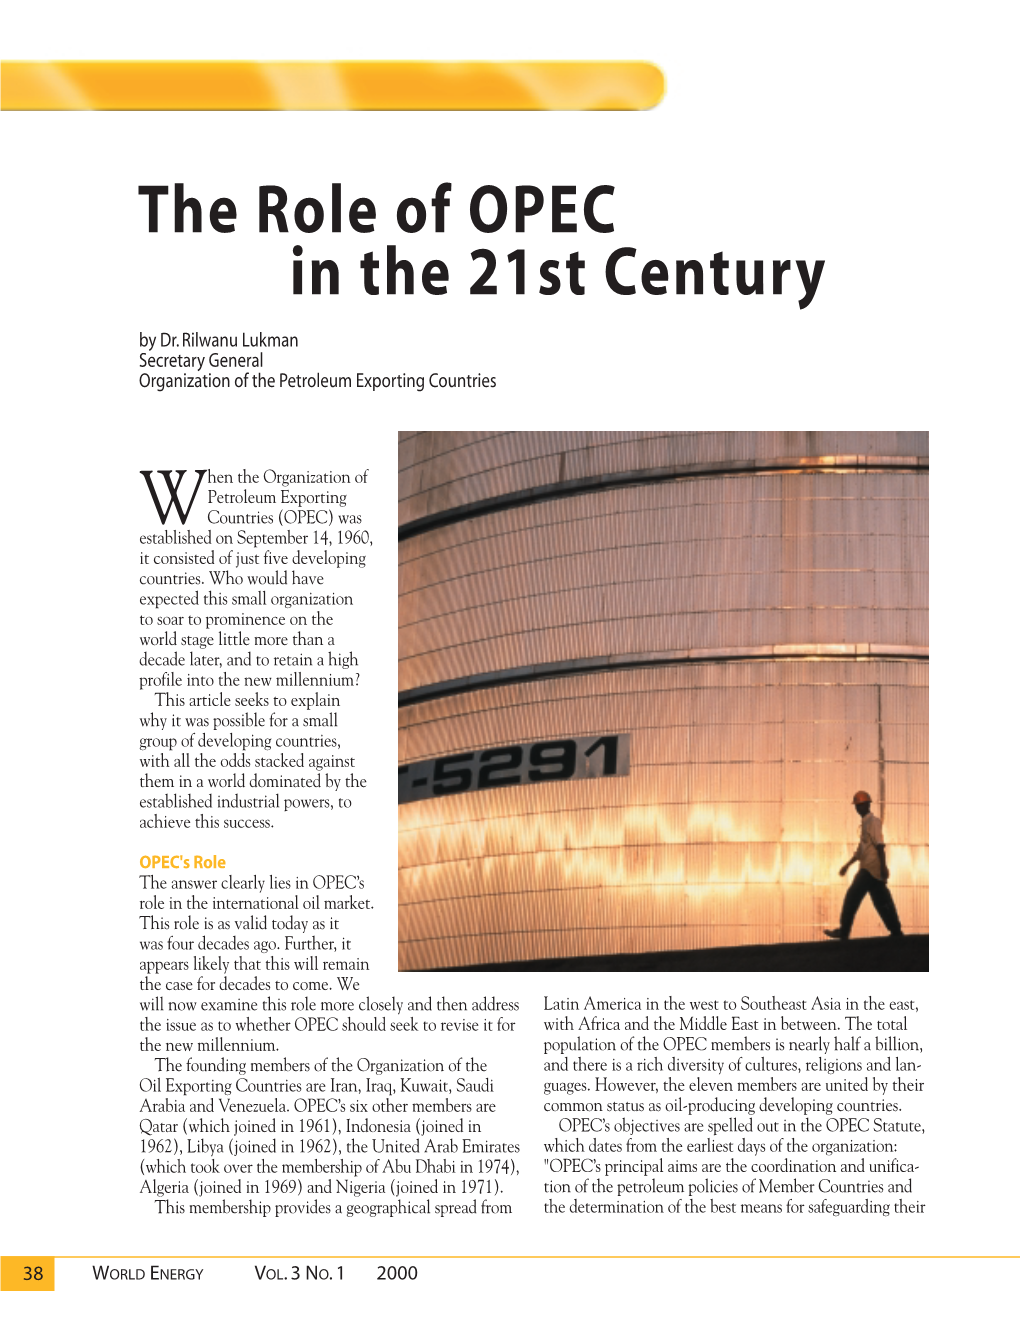 The Role of OPEC in the 21St Century